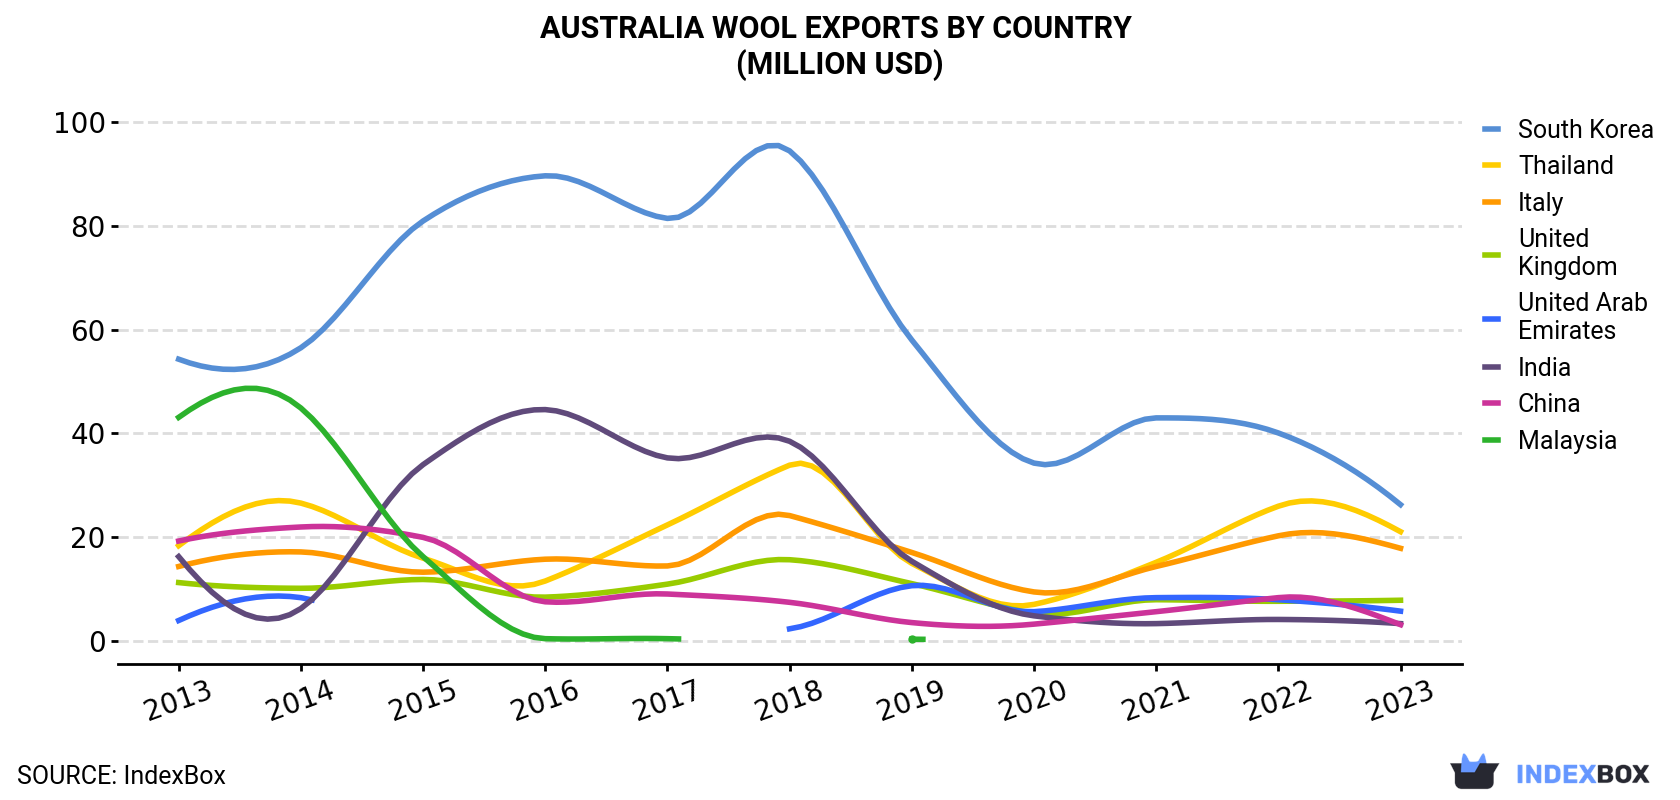 Australia Wool Exports By Country (Million USD)